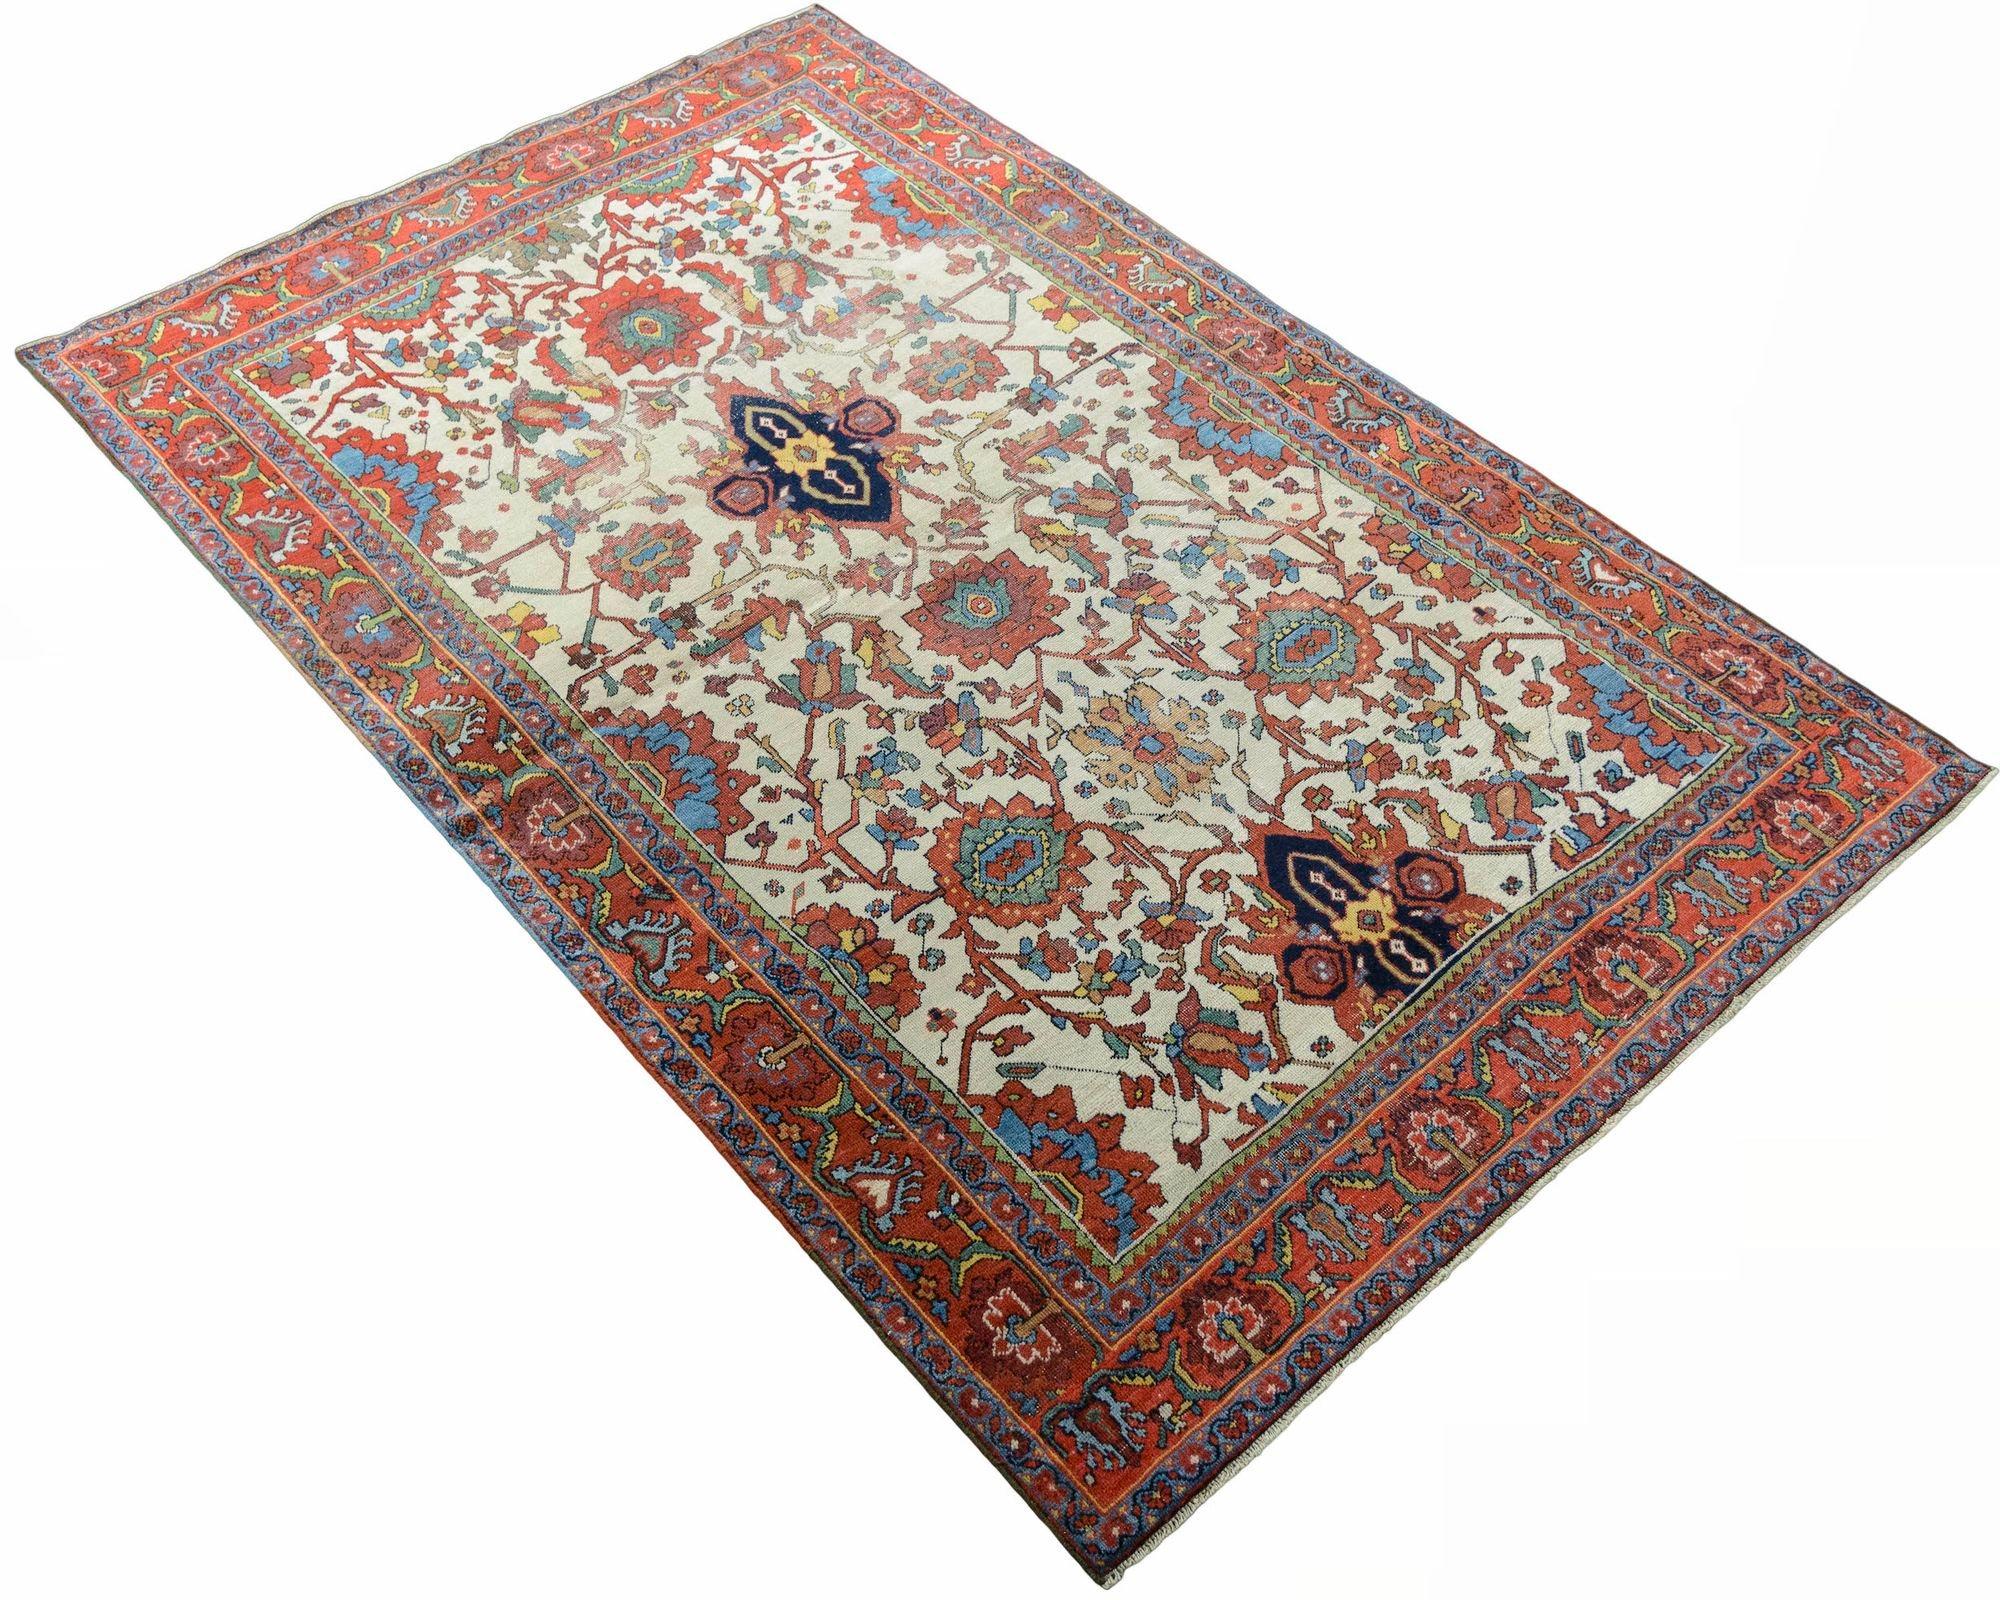 Late 19th Century Antique Ferahan Rug 1.97m x 1.24m For Sale